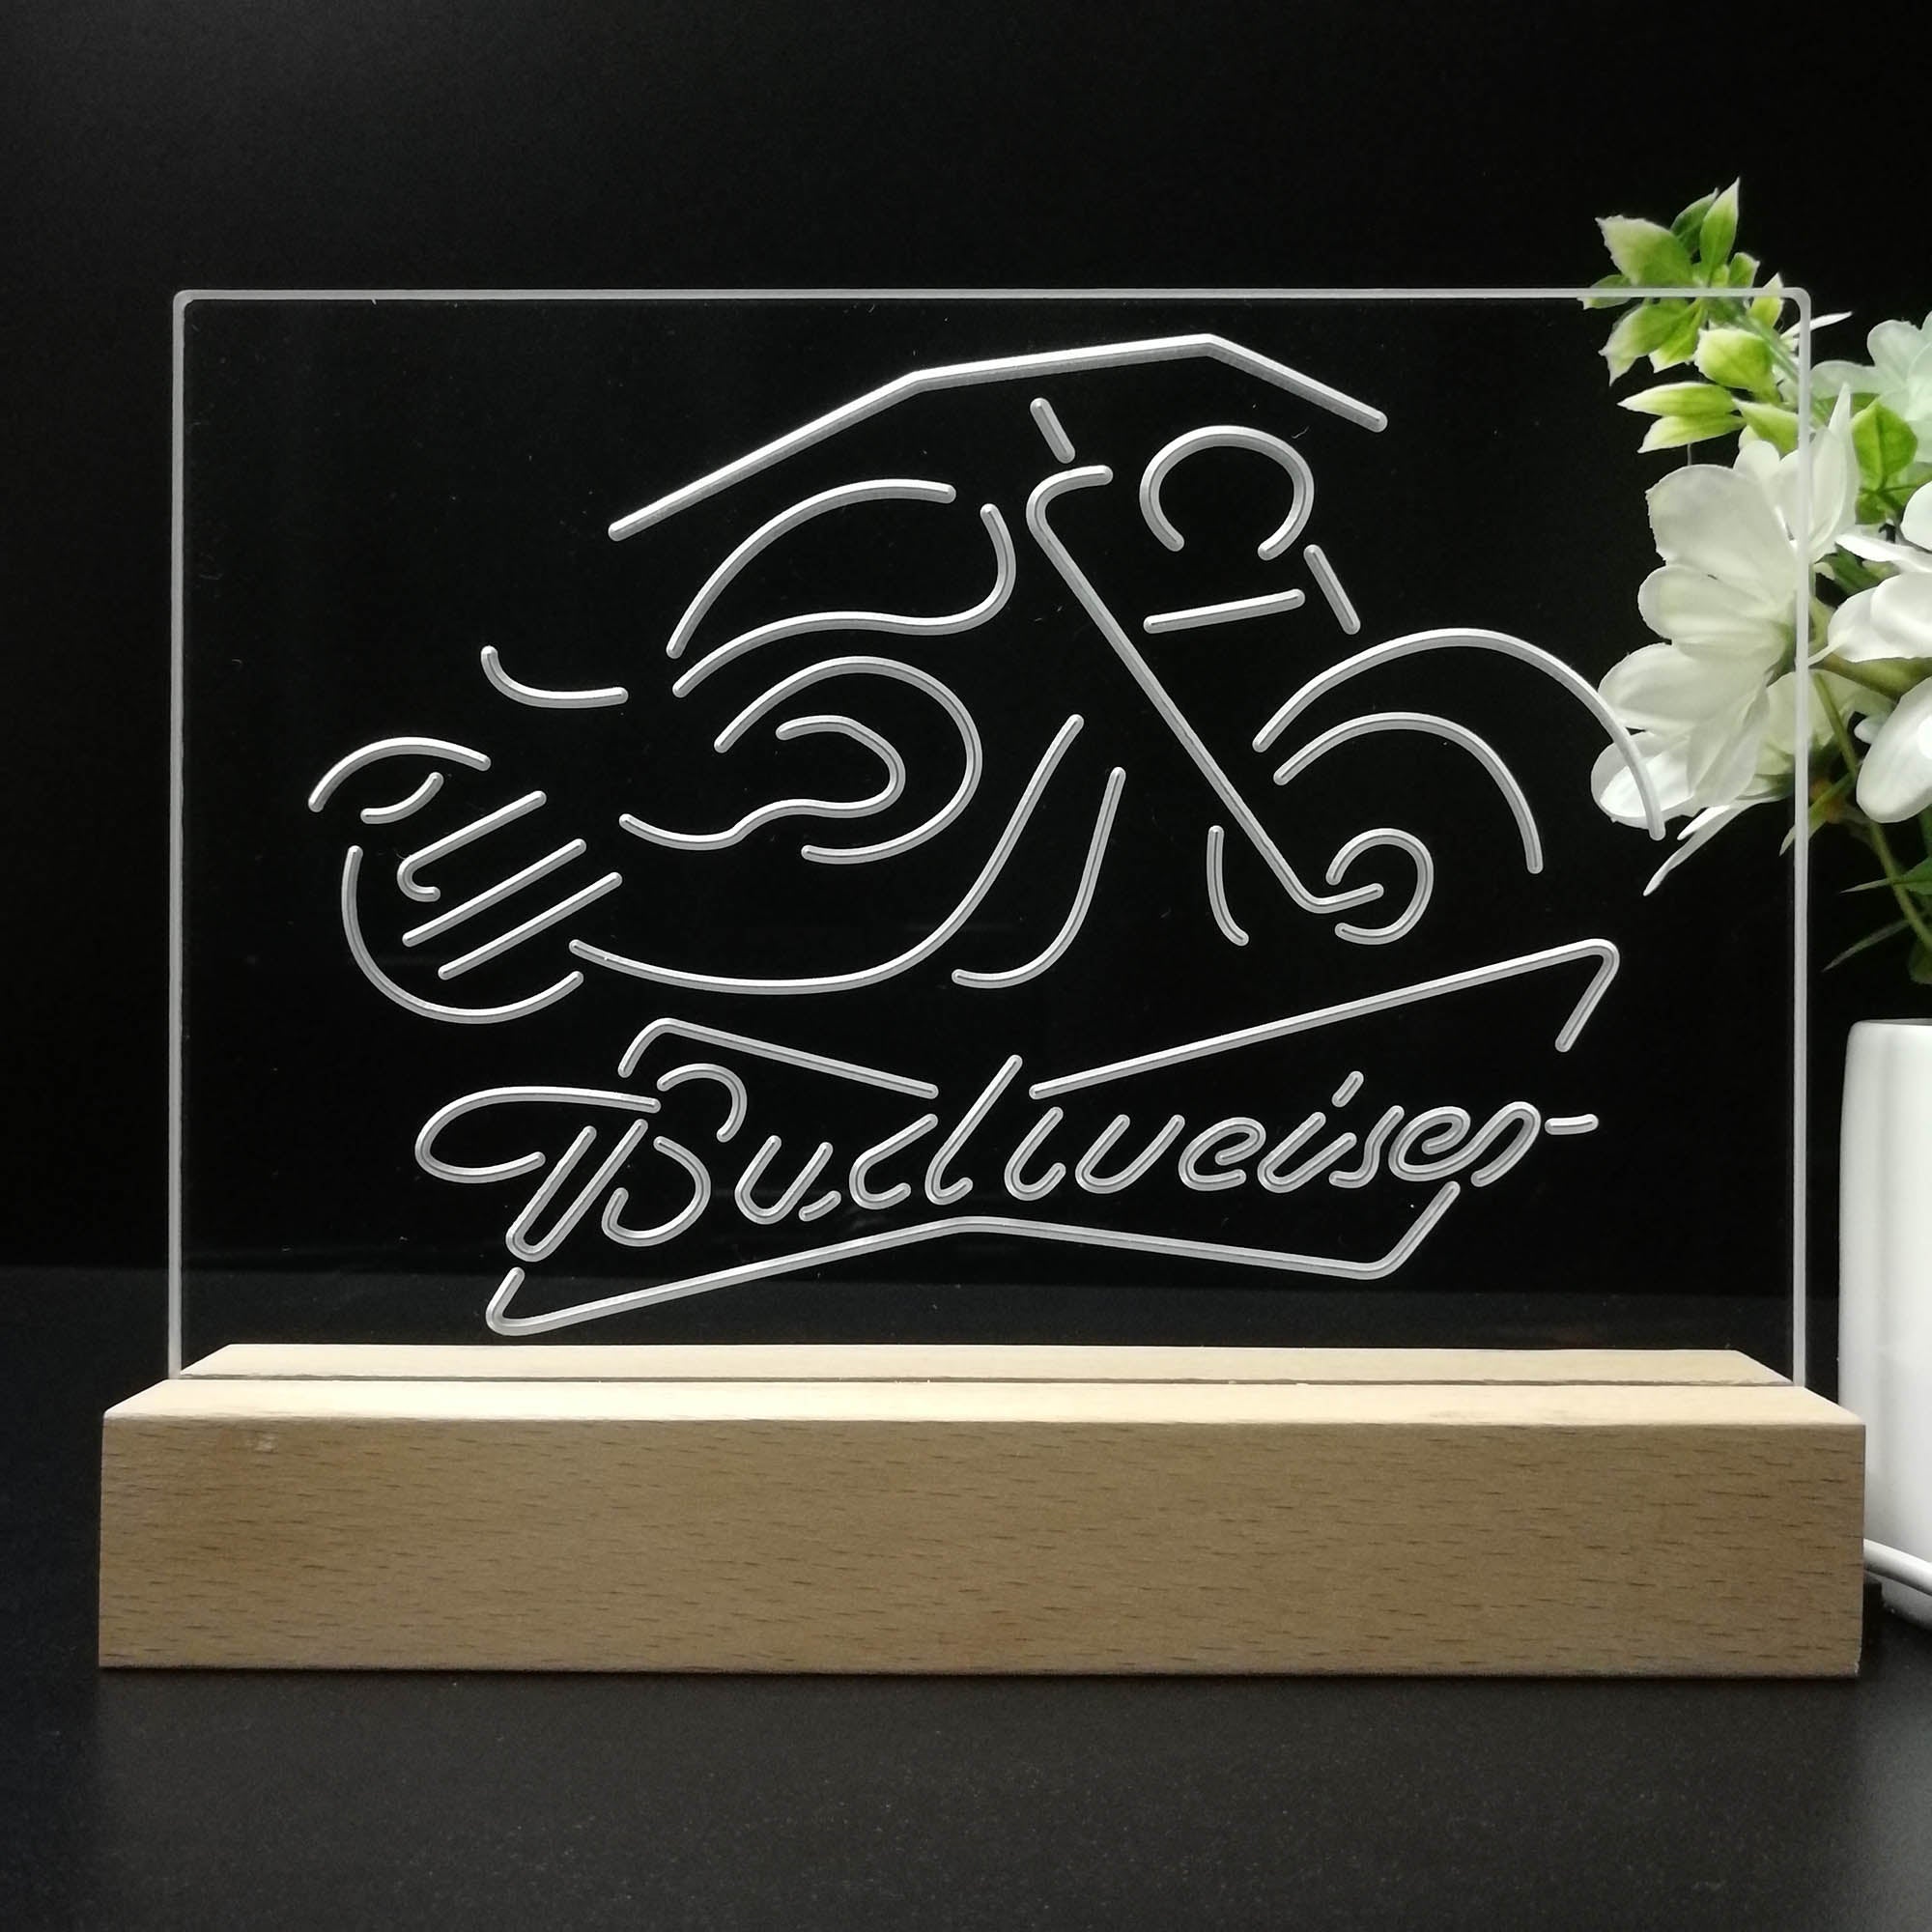 Budweiser Beer Motorcycle Night Light LED Sign